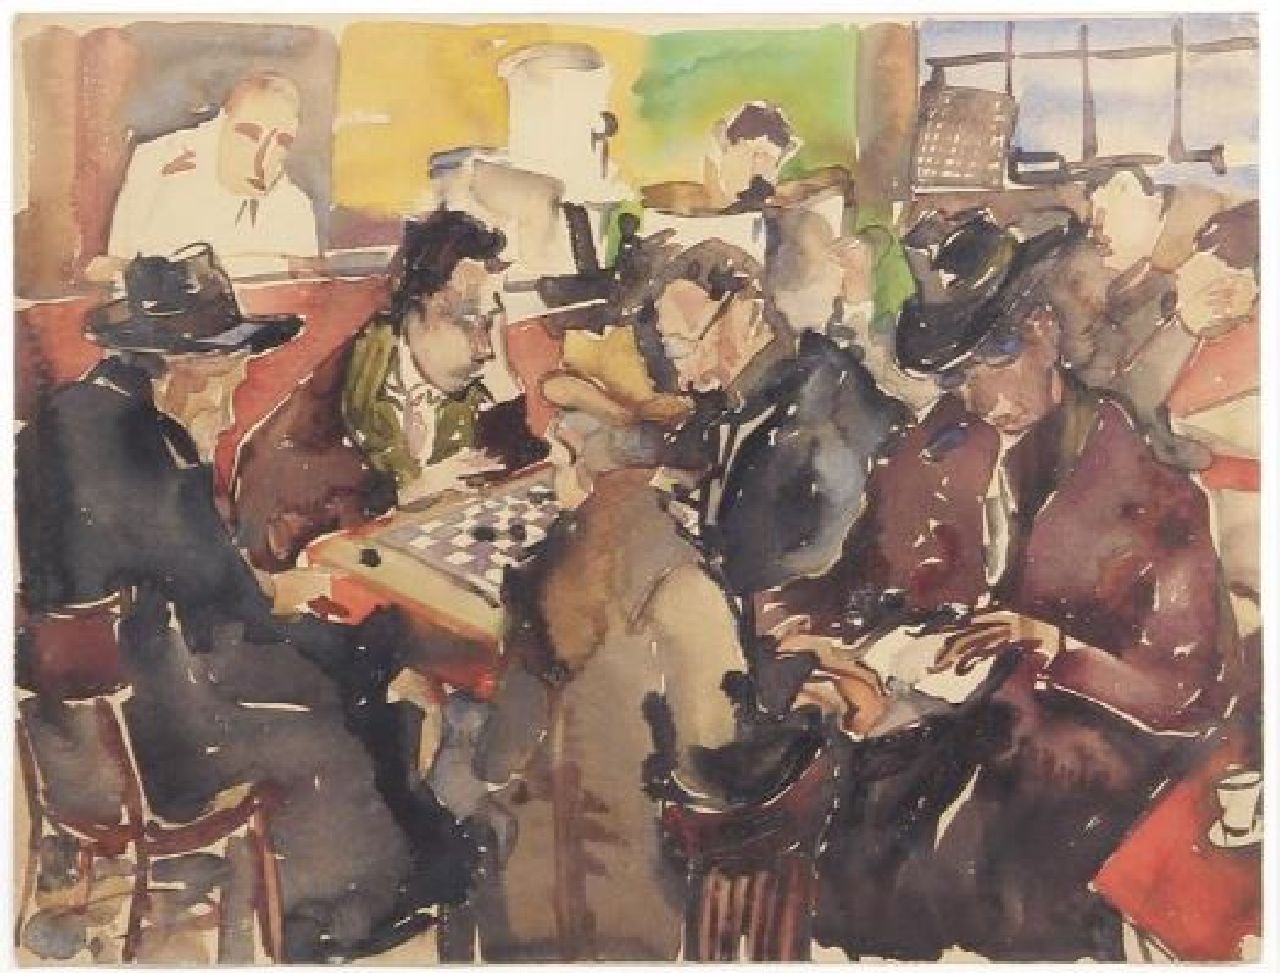 Albert E.  | Ernest Albert | Watercolours and drawings offered for sale | Playing checkers in the pub, watercolour on paper 37.3 x 49.3 cm